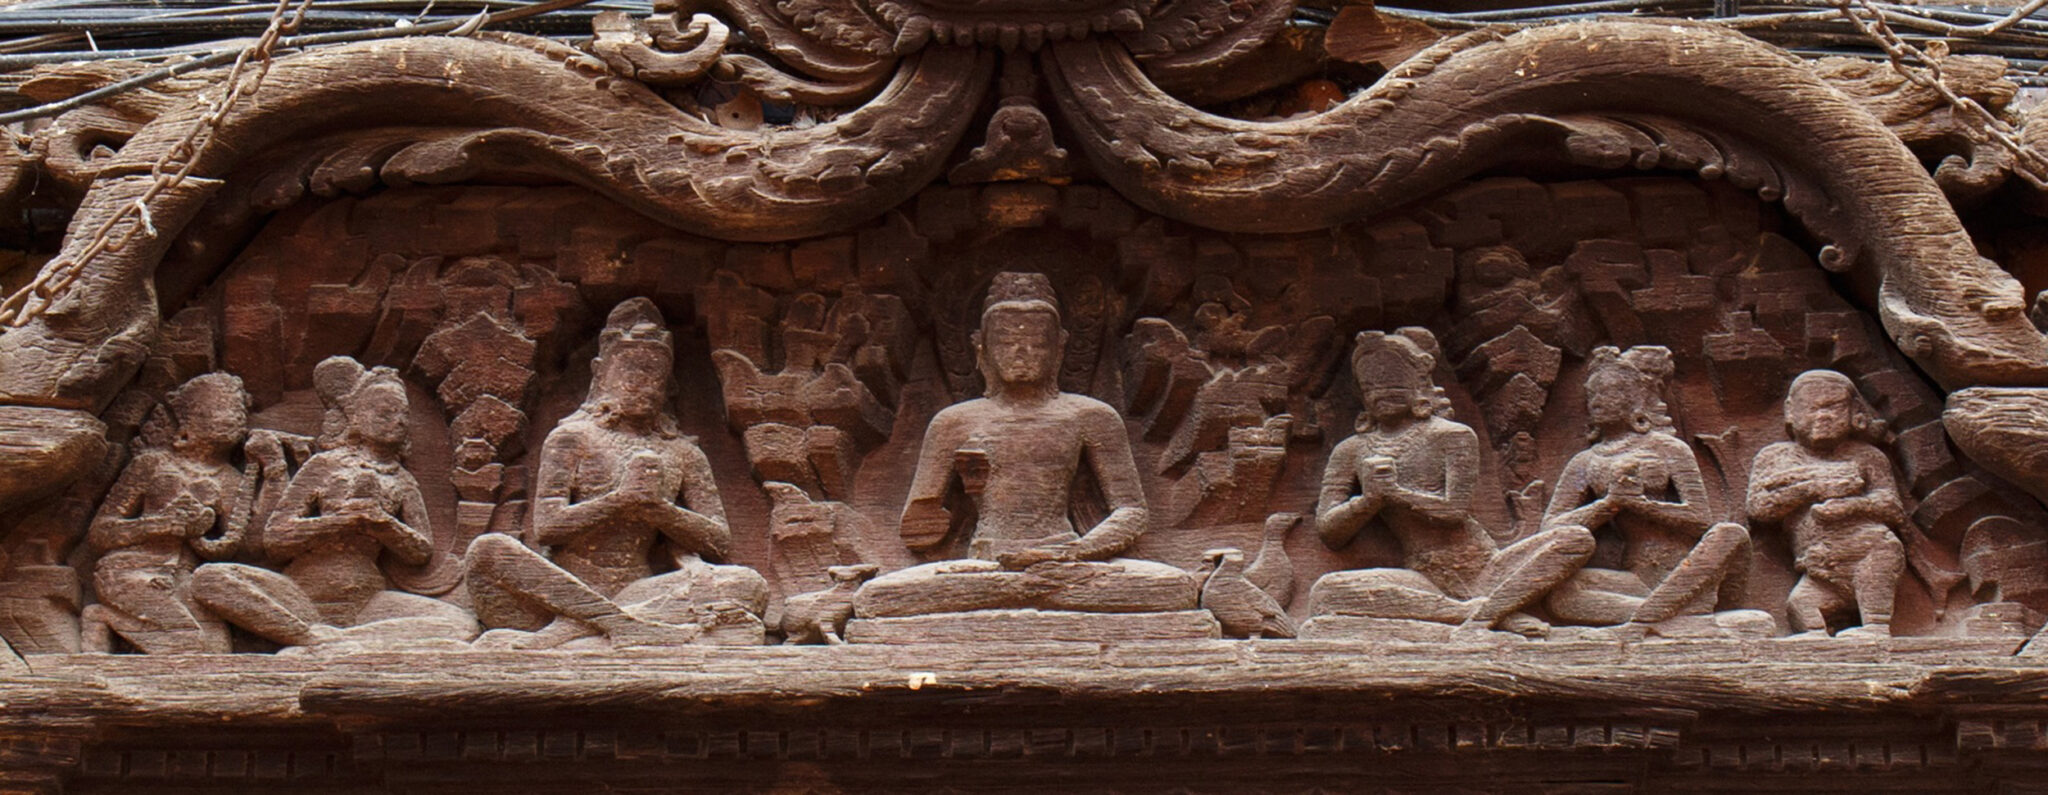 Medium view of densely carved brown wooden lintel beneath row of small windows; features scene with seven seated figures framed by scrollwork